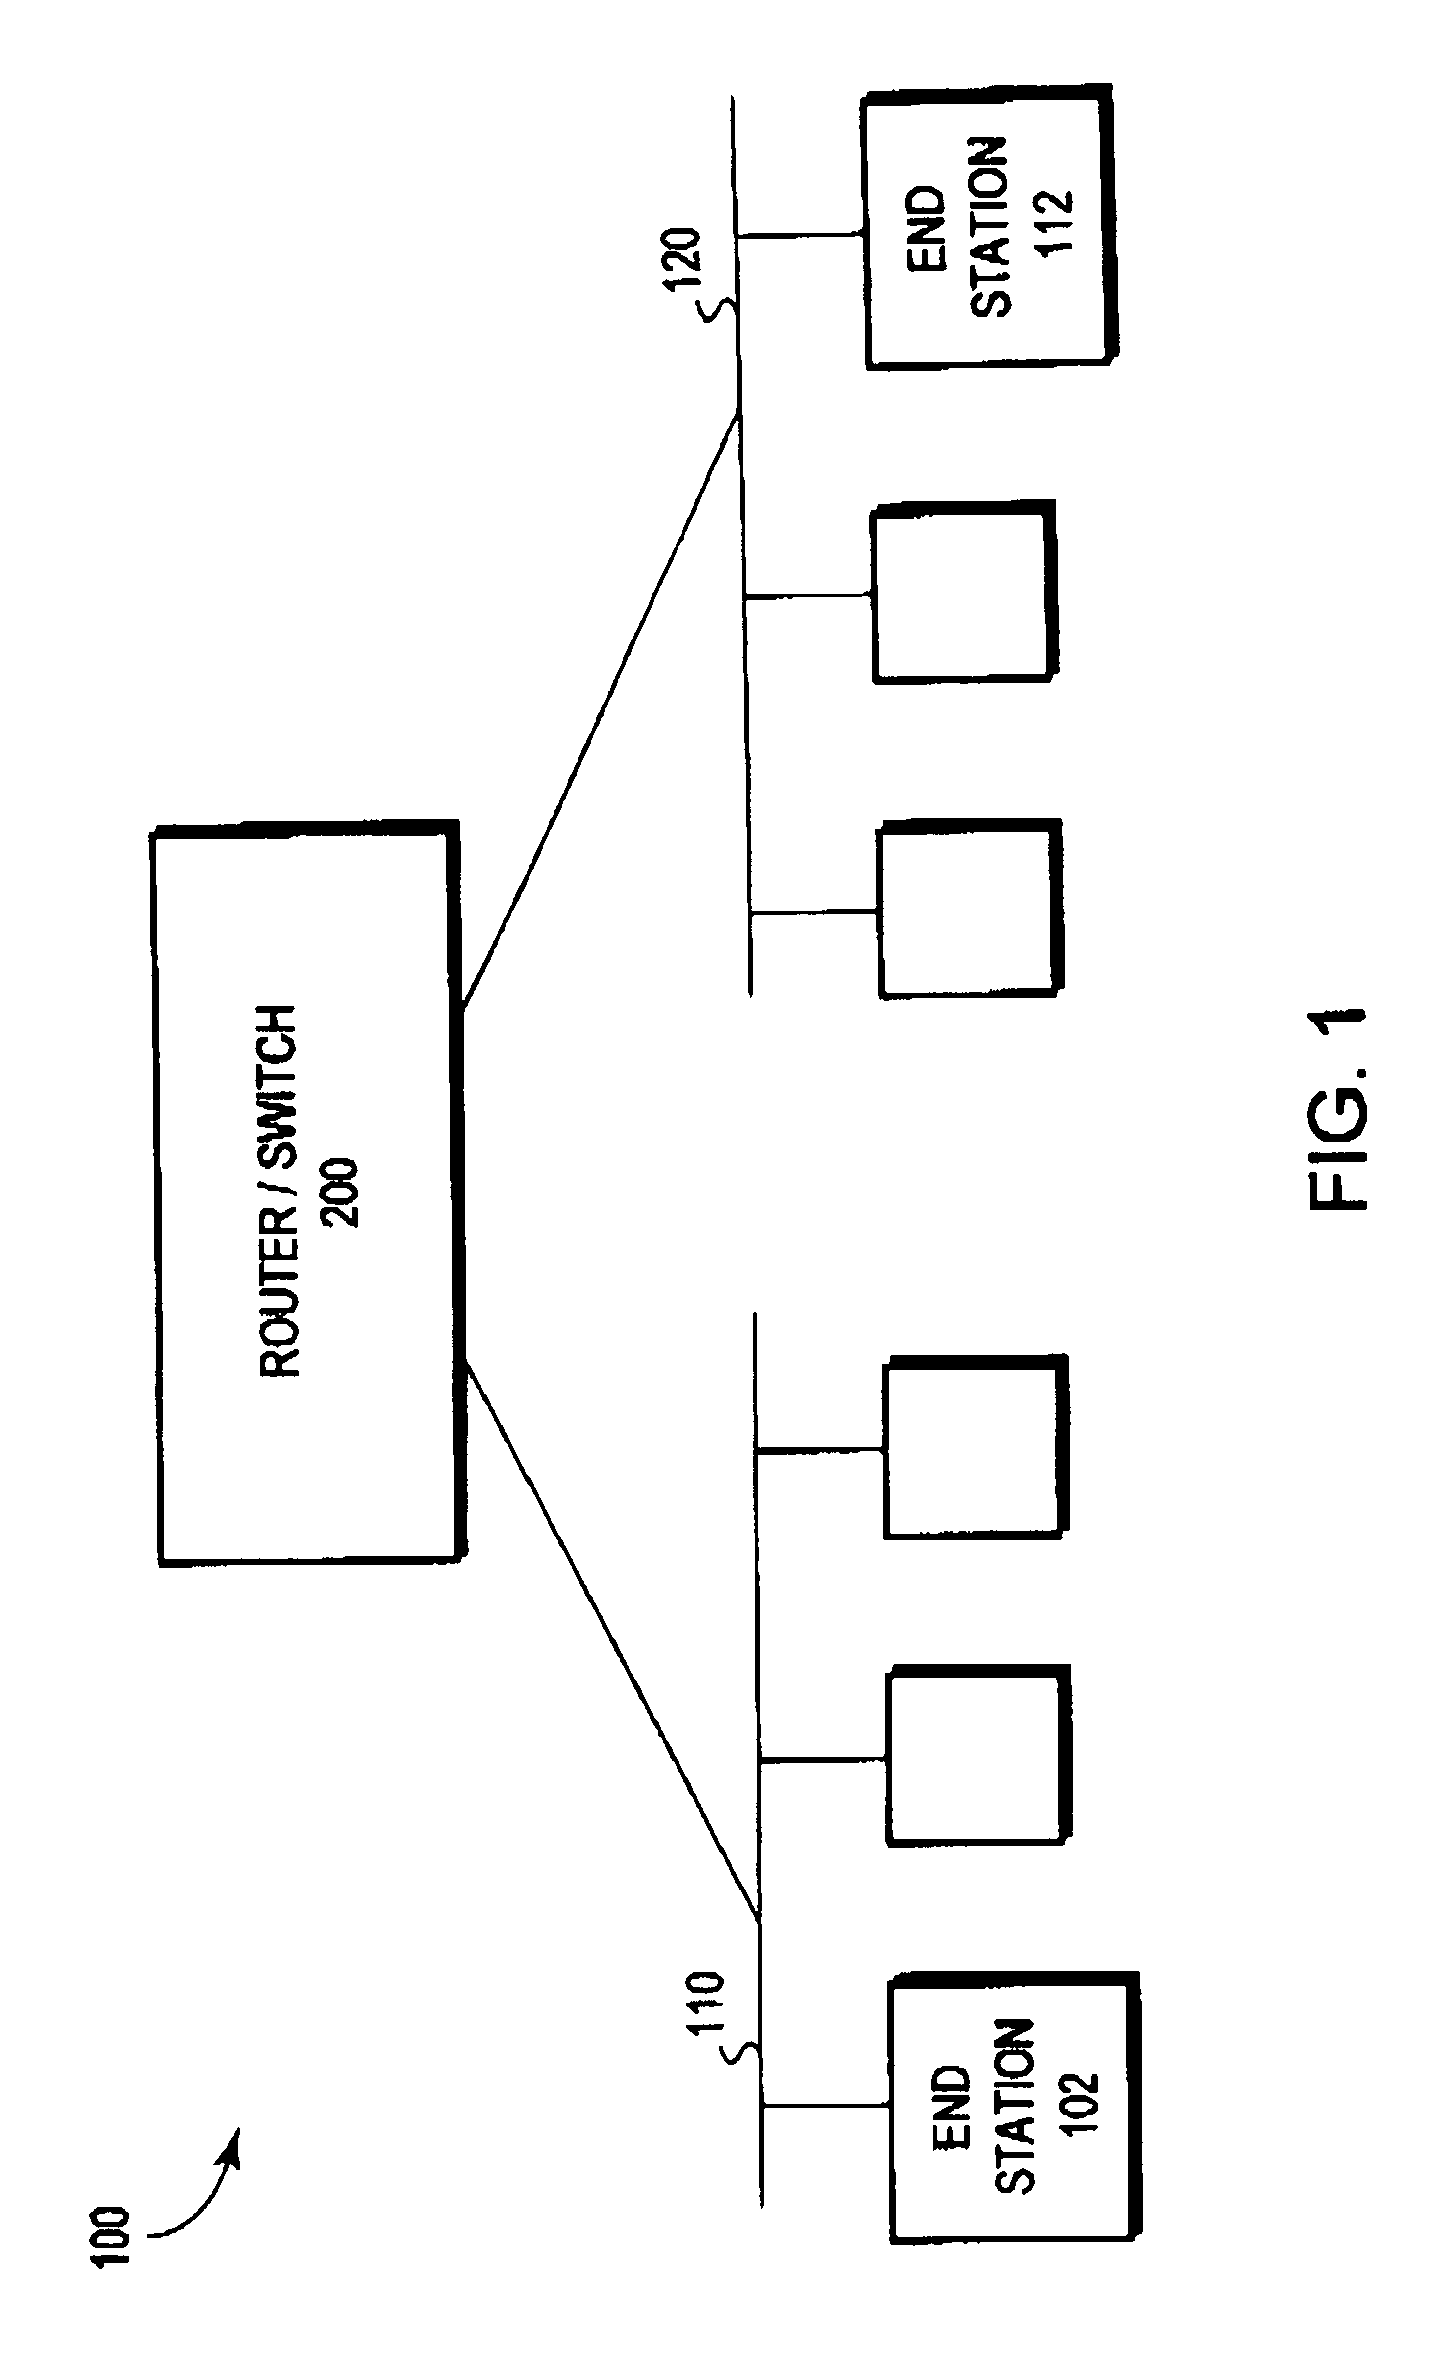 Packet striping across a parallel header processor